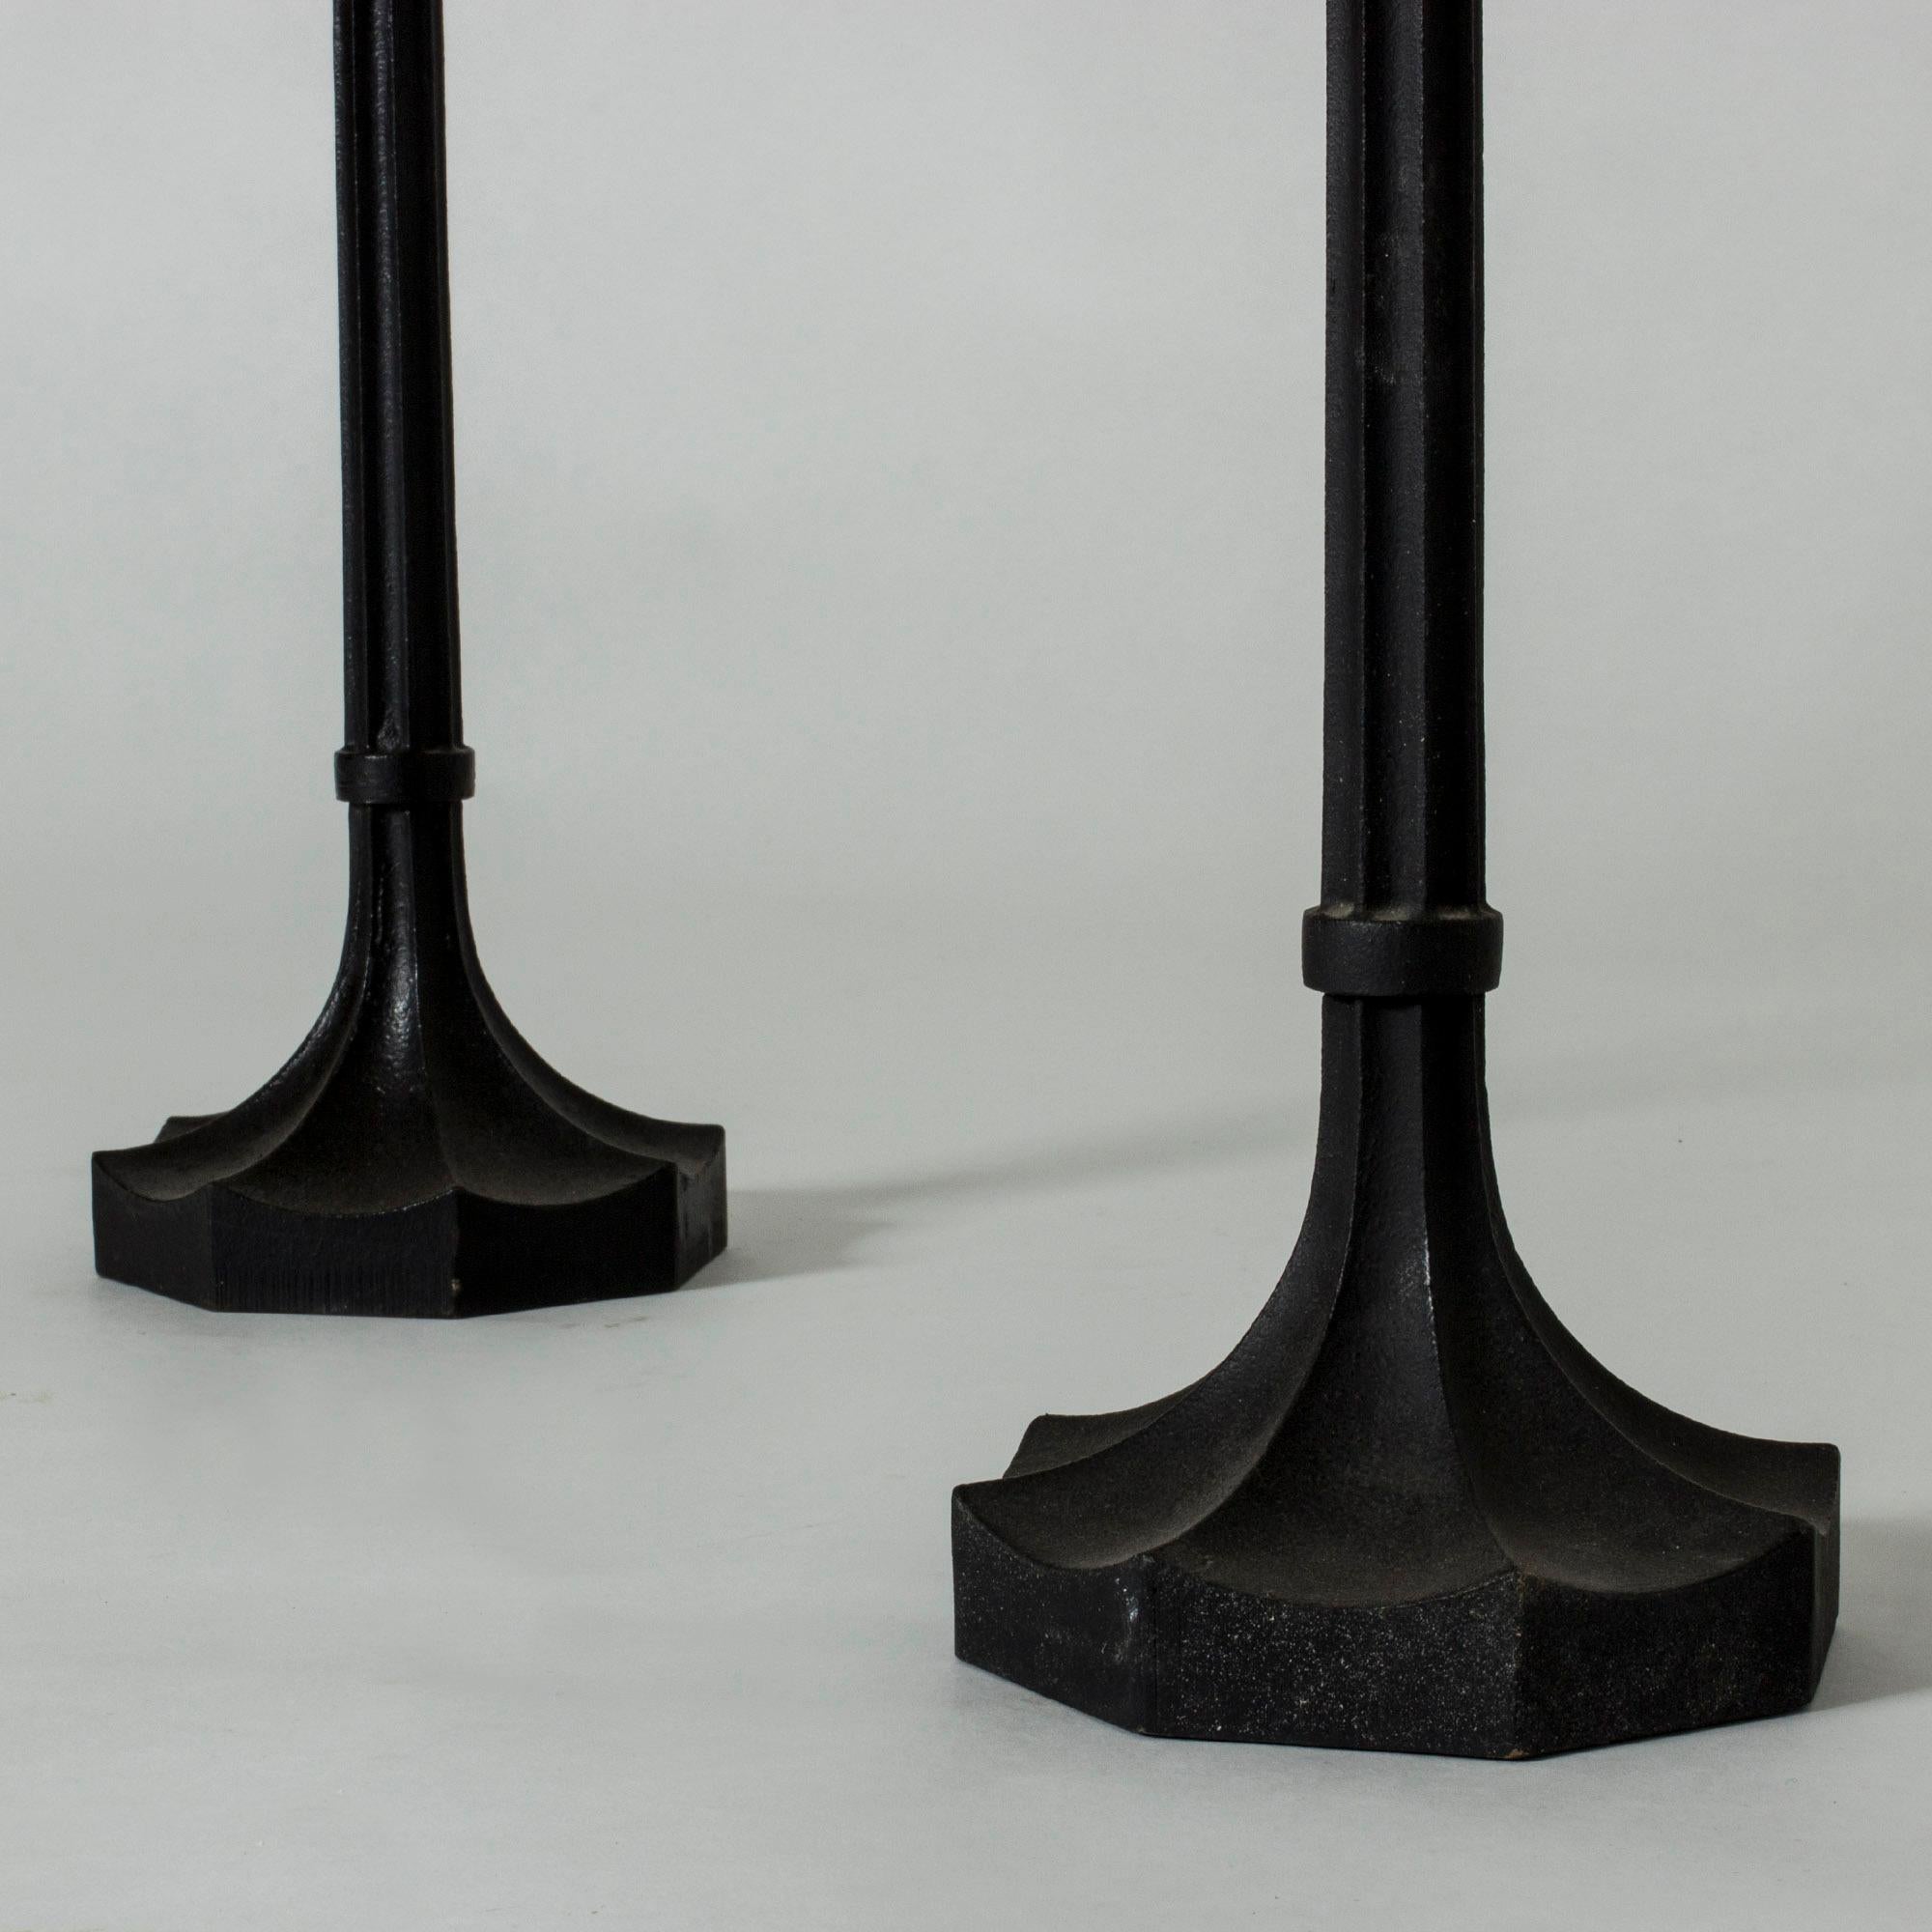 Pair of Swedish Cast Iron Candlesticks Designed by Sigurd Persson for Kockums 1